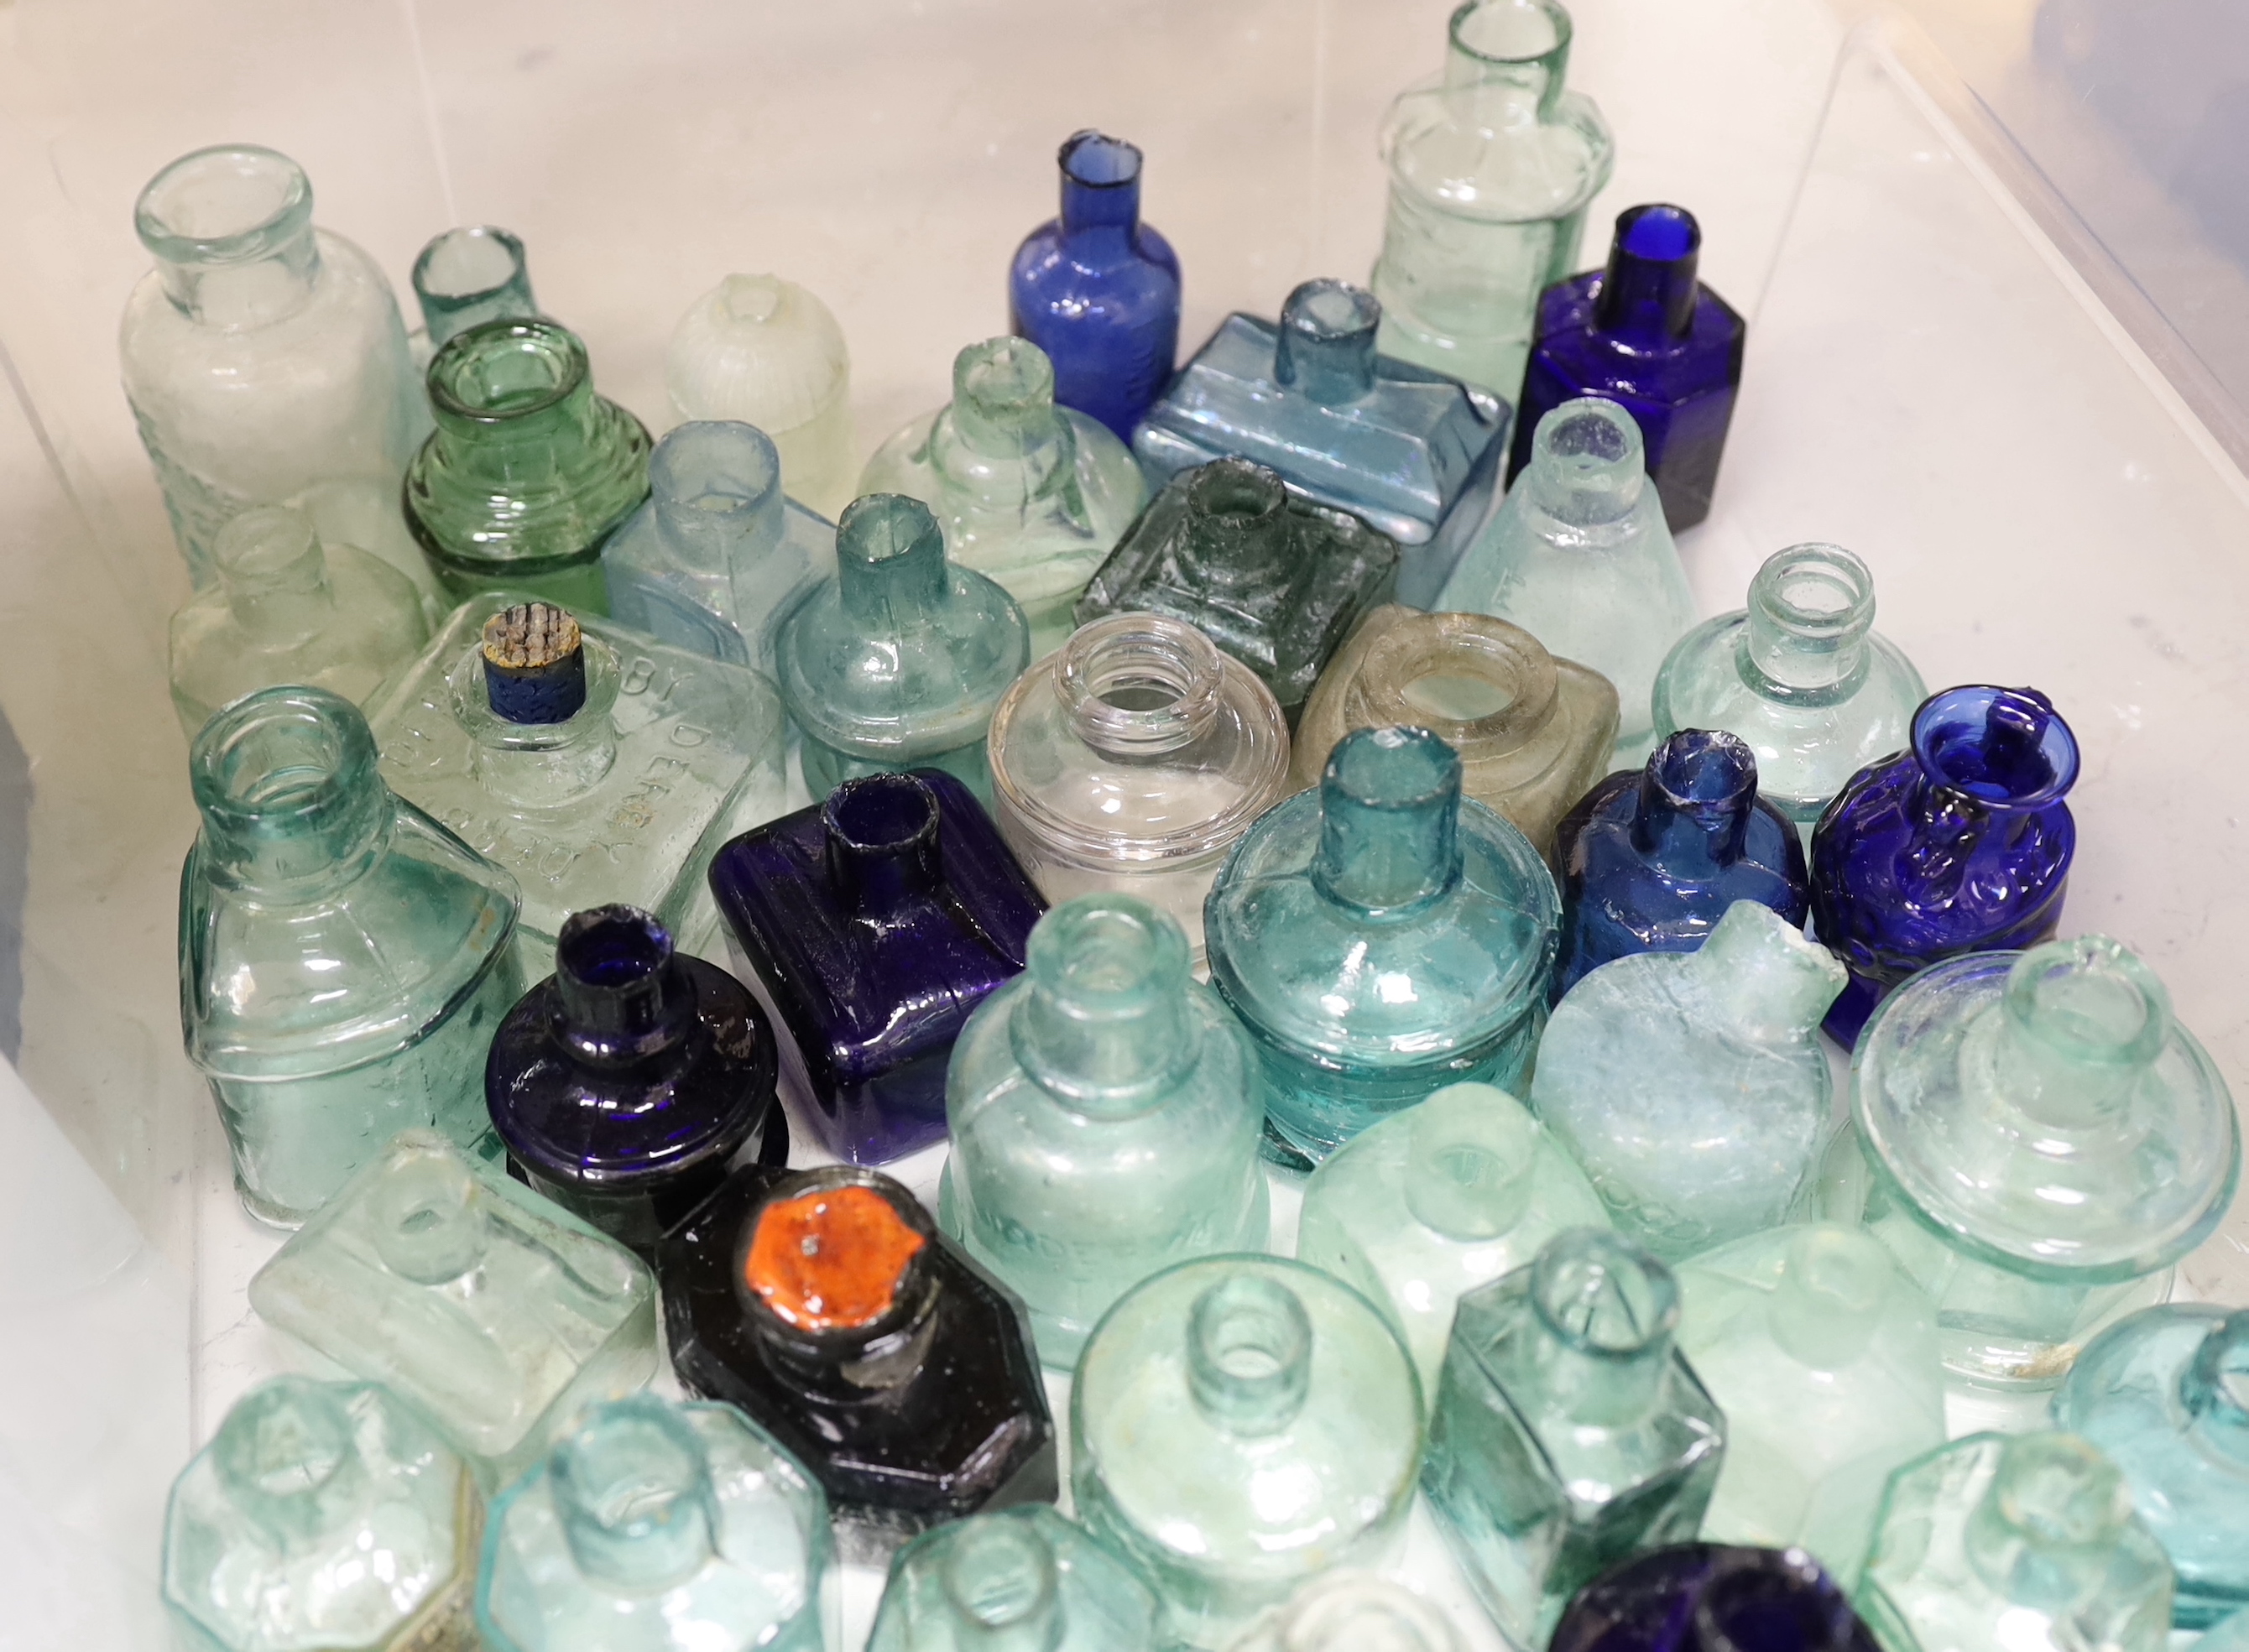 A collection of late 19th/early 20th century glass ink bottles, medicine bottles, sauce bottles and other glass vessels, brand names and advertising moulded into the glass on some examples, original paper labels to two i